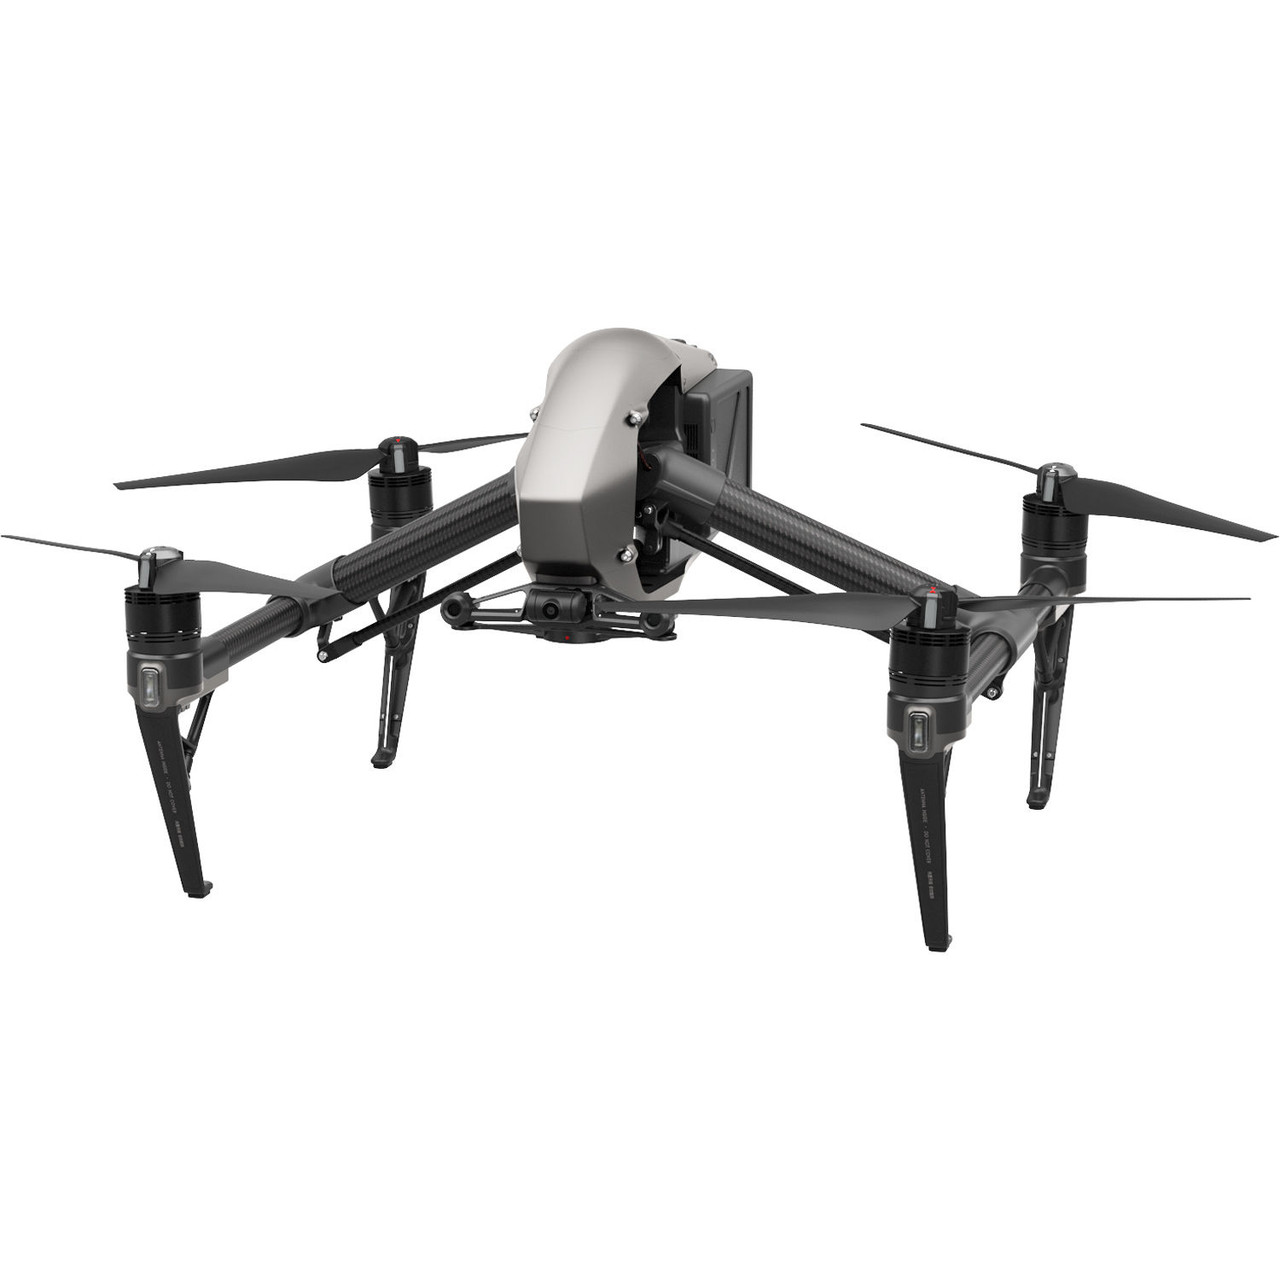 DJI CP.IN.00000017.01 Inspire 2 Advanced Kit with Zenmuse X7 Gimbal &  16mm/2.8 ASPH ND Lens, Super 35 Sensor, 14 Stops of Dynamic Range, 6K  CinemaDNG, 24 MP Stills, Apple ProRes RAW, etc